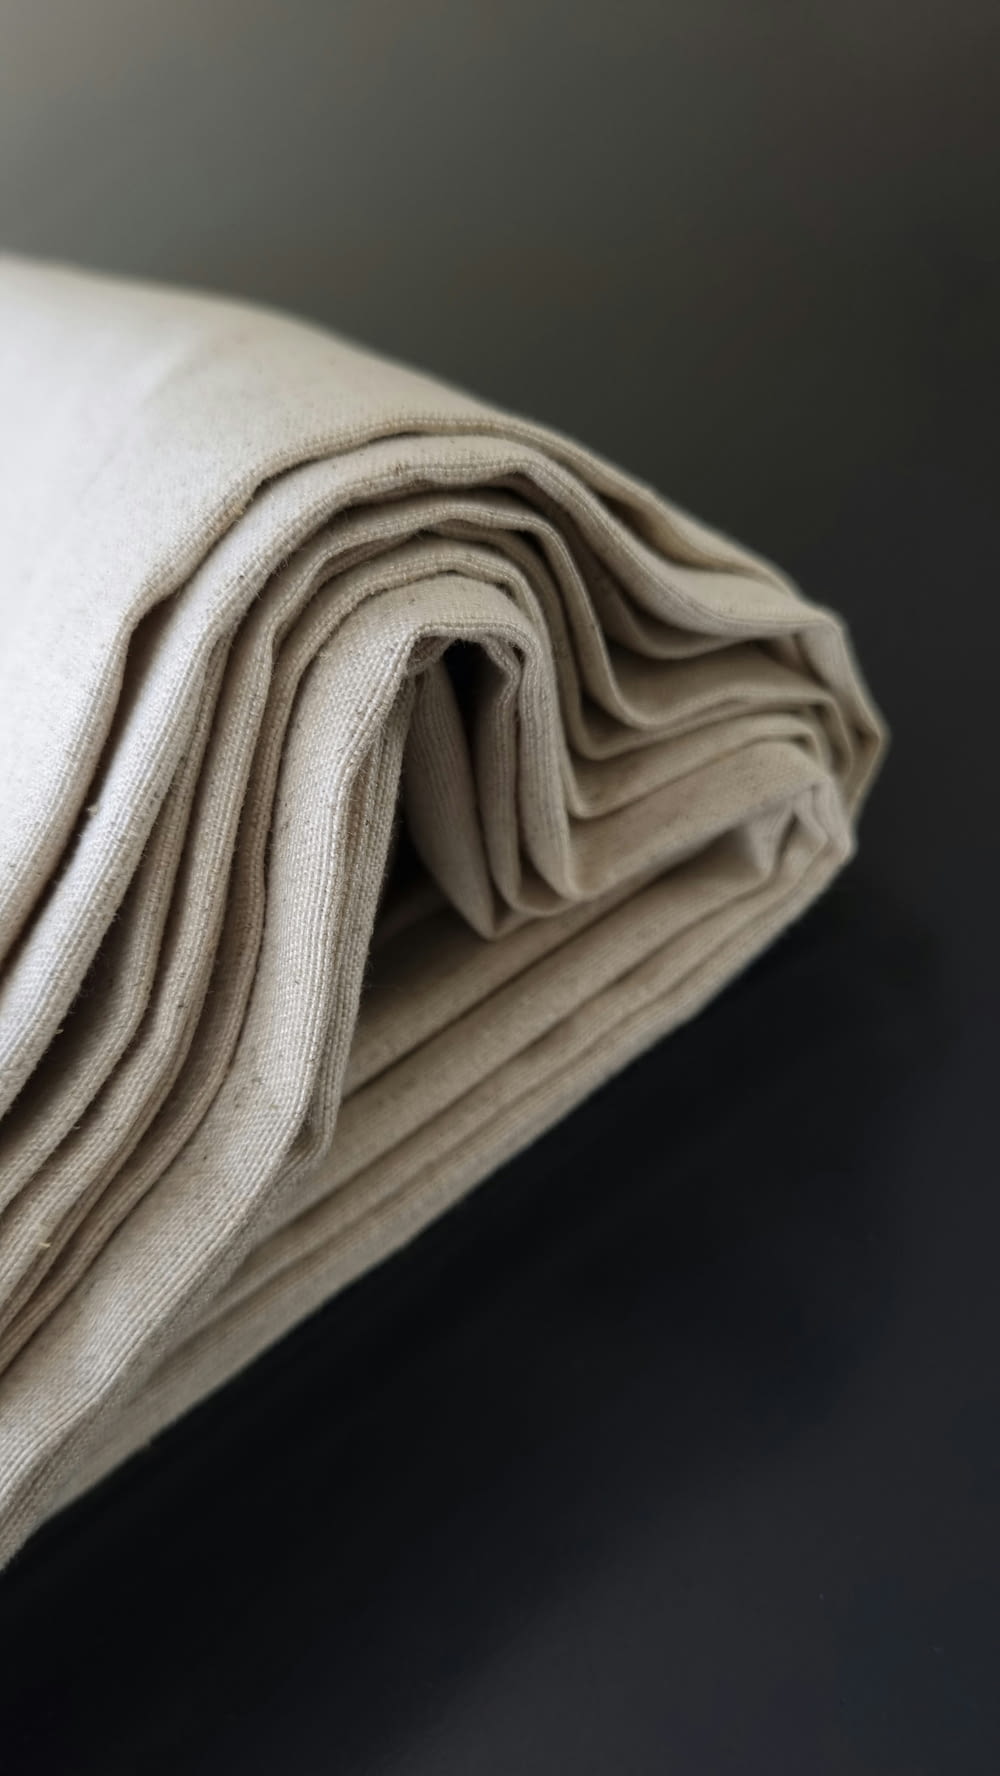 a close up of a folded cloth on a table